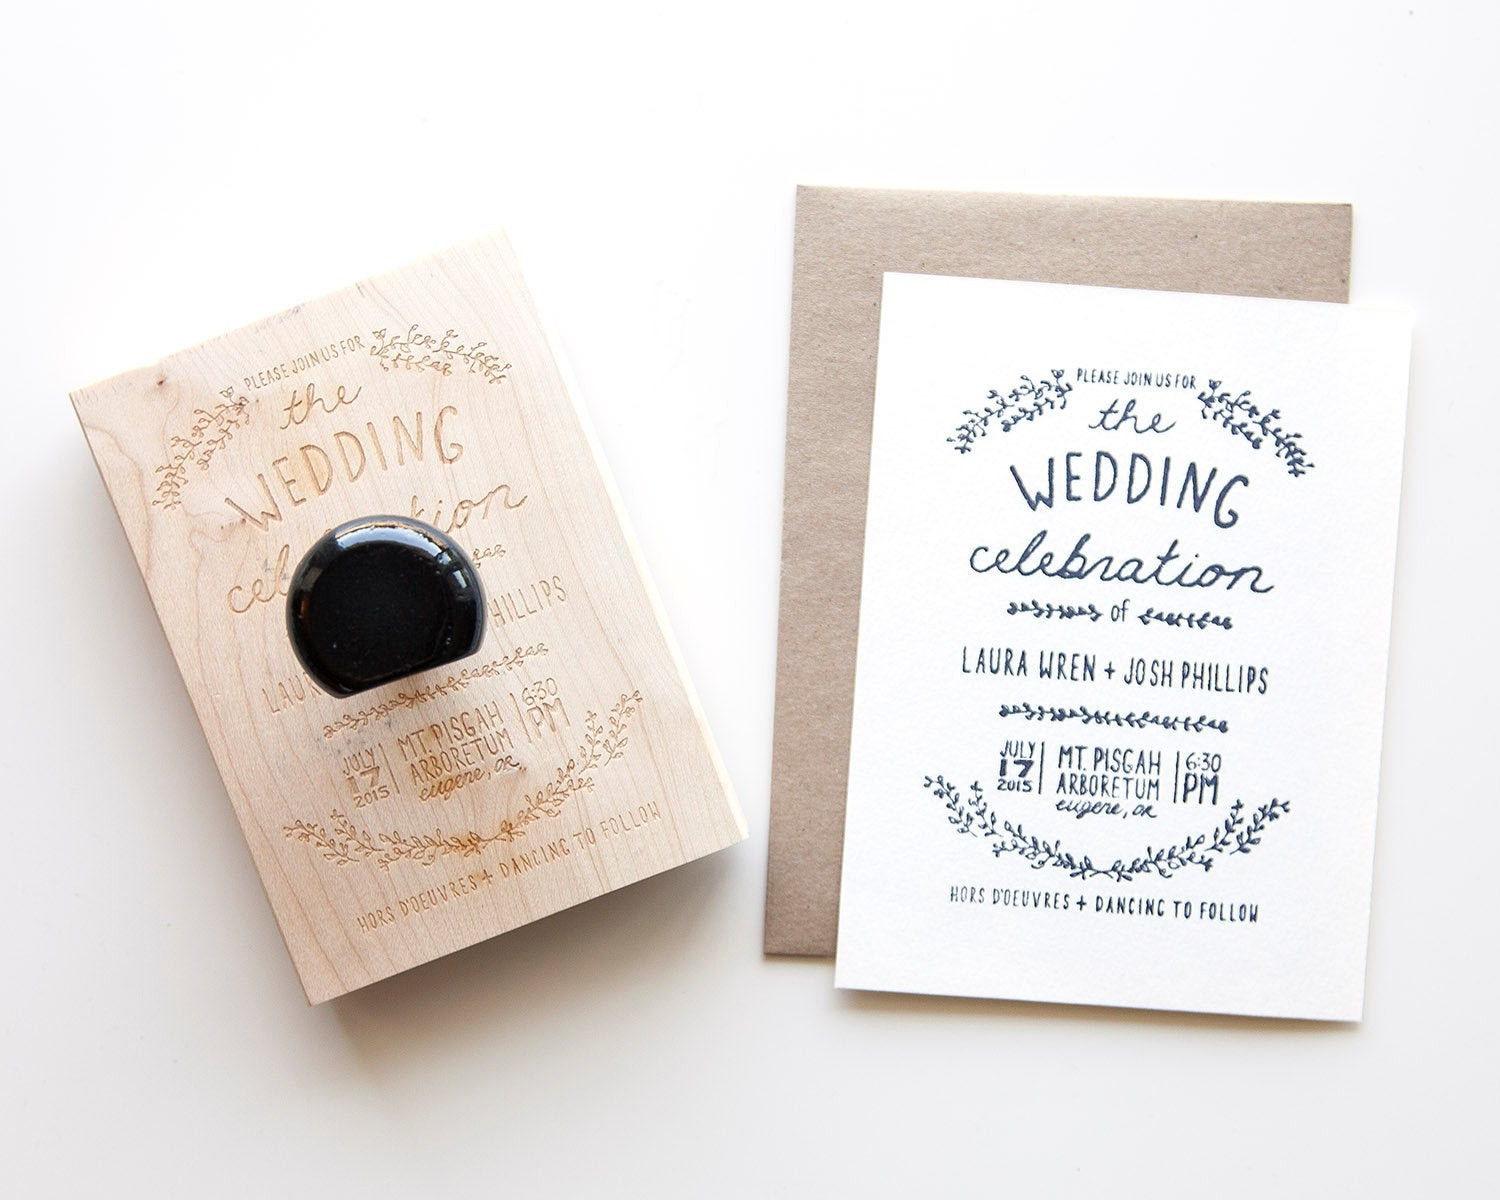 Postage Stamps For Wedding Invitations
 Custom Wedding Invitation Stamp Wedding Stamp by